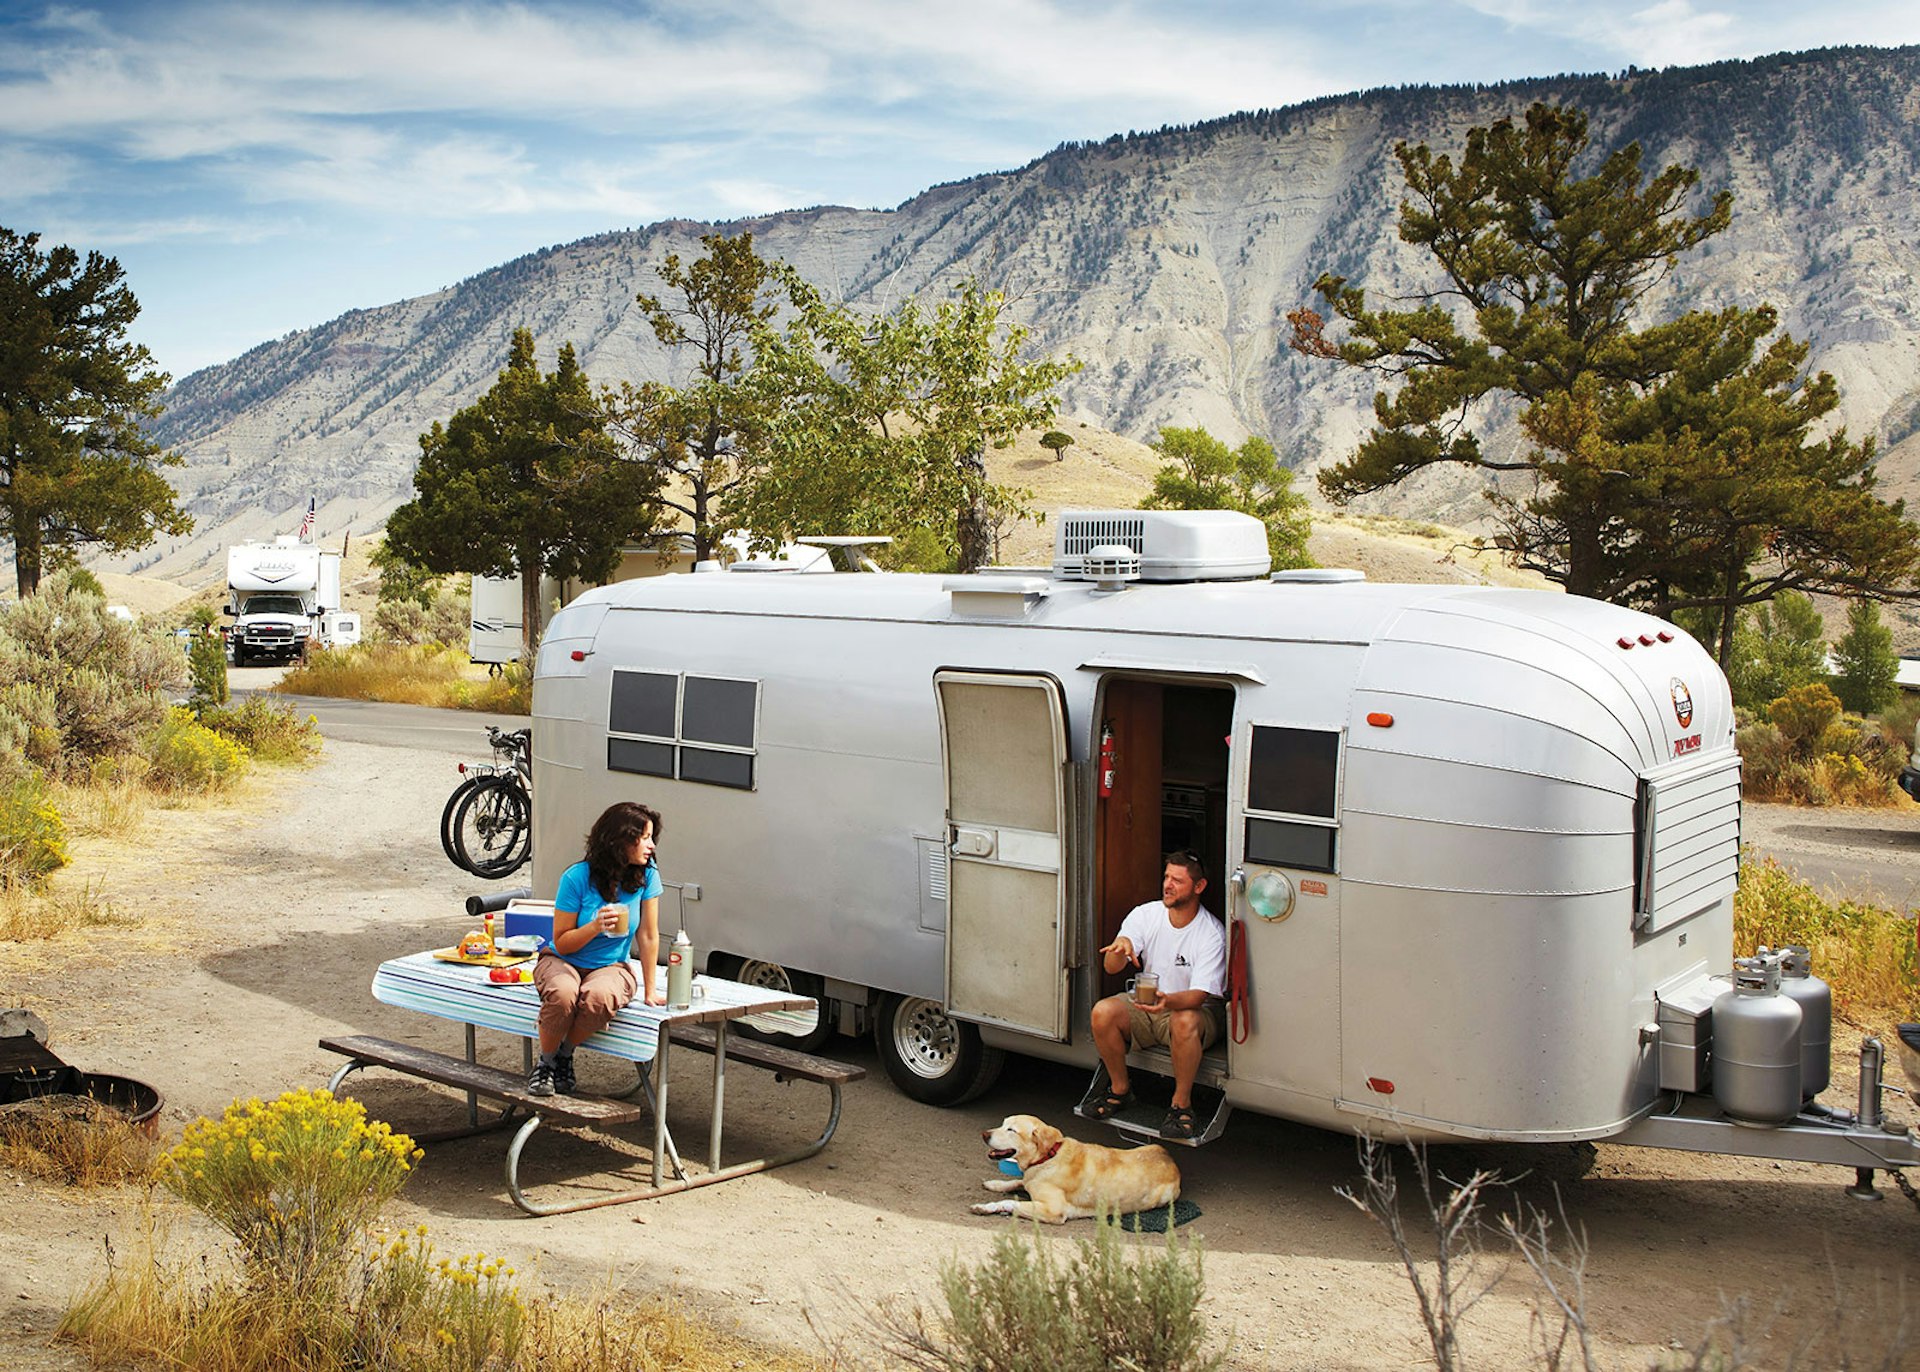 Danielle and Alex Sonsini by their restored RV at Mammoth Hot Springs in Yellowstone National Park © Matt Munro / Lonely Planet